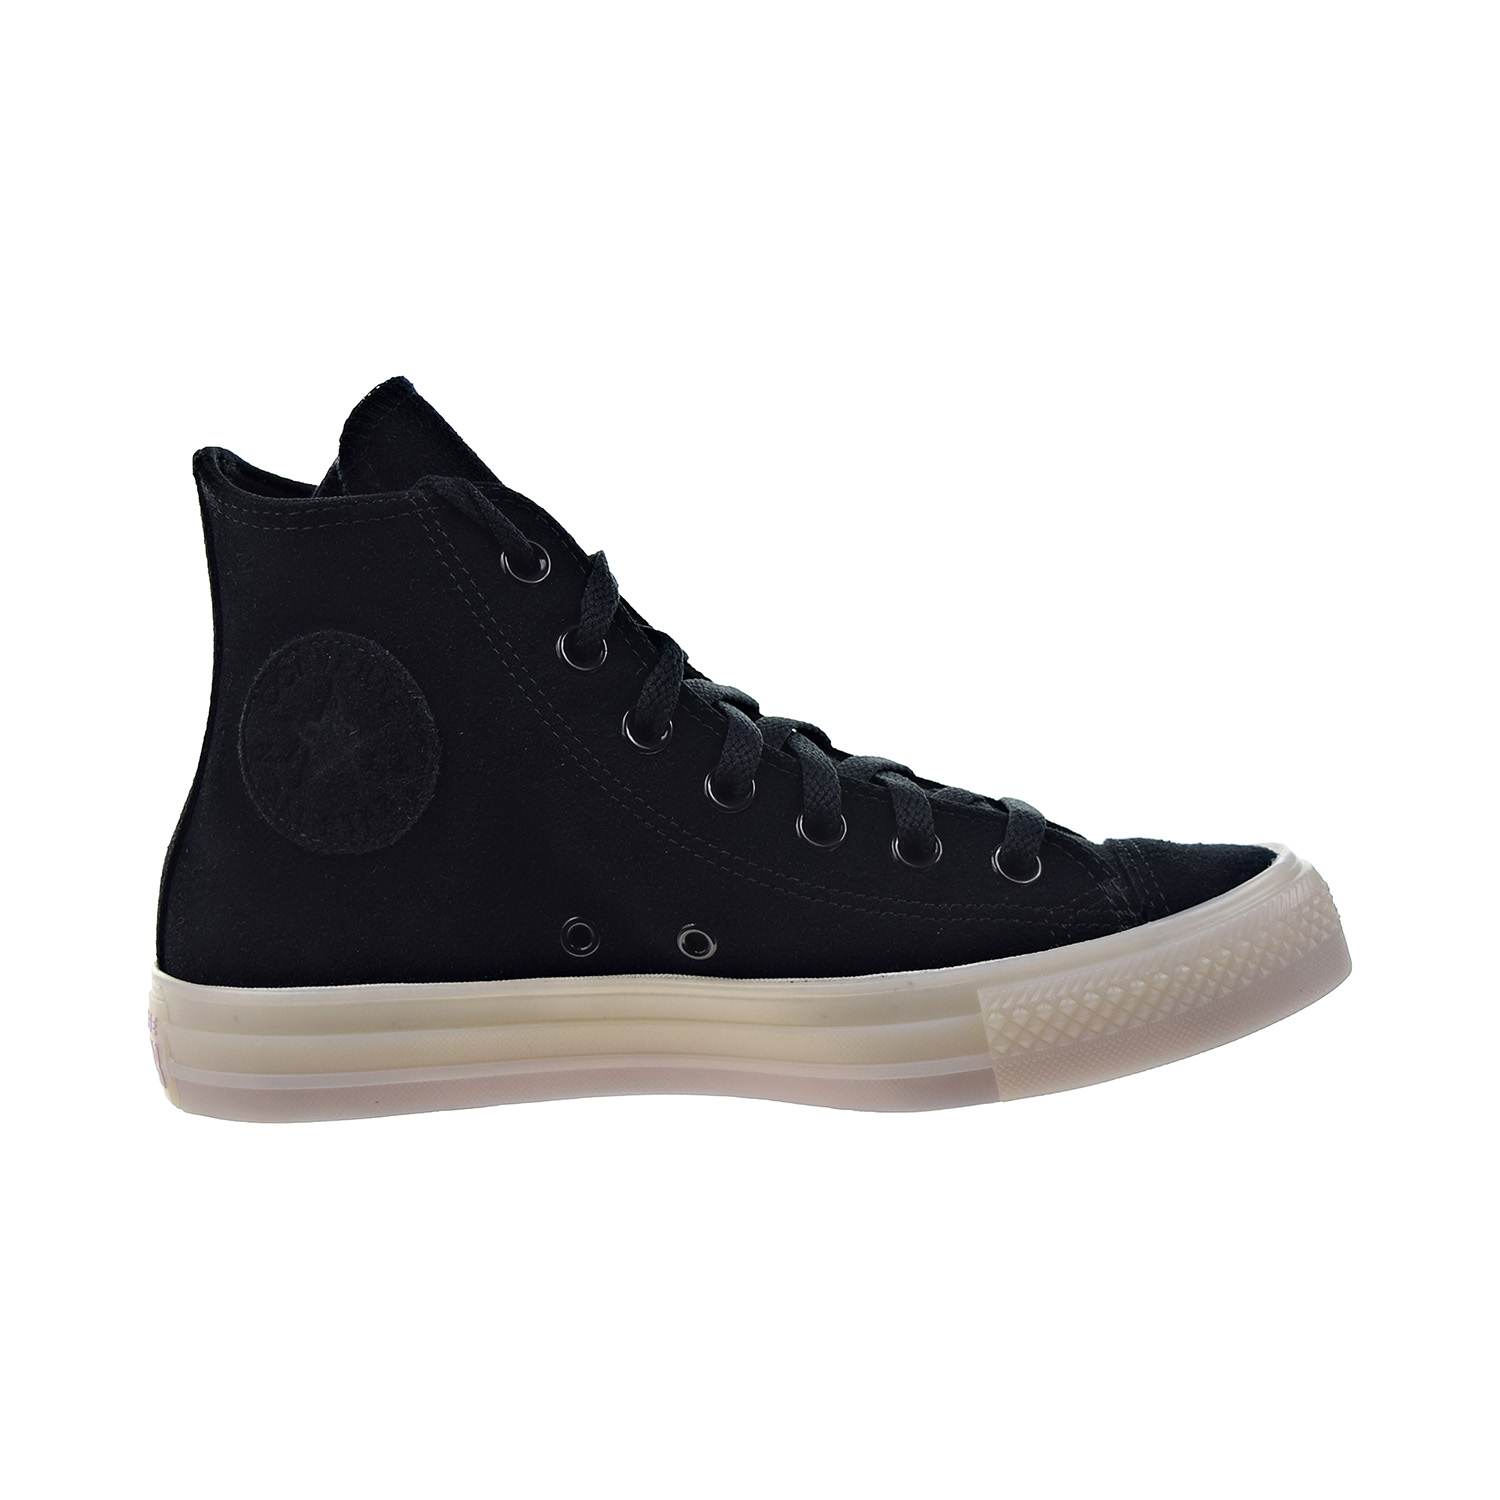 Converse Chuck Taylor All Star Men's Shoes Black-Lilac Mist 166138c - image 1 of 6